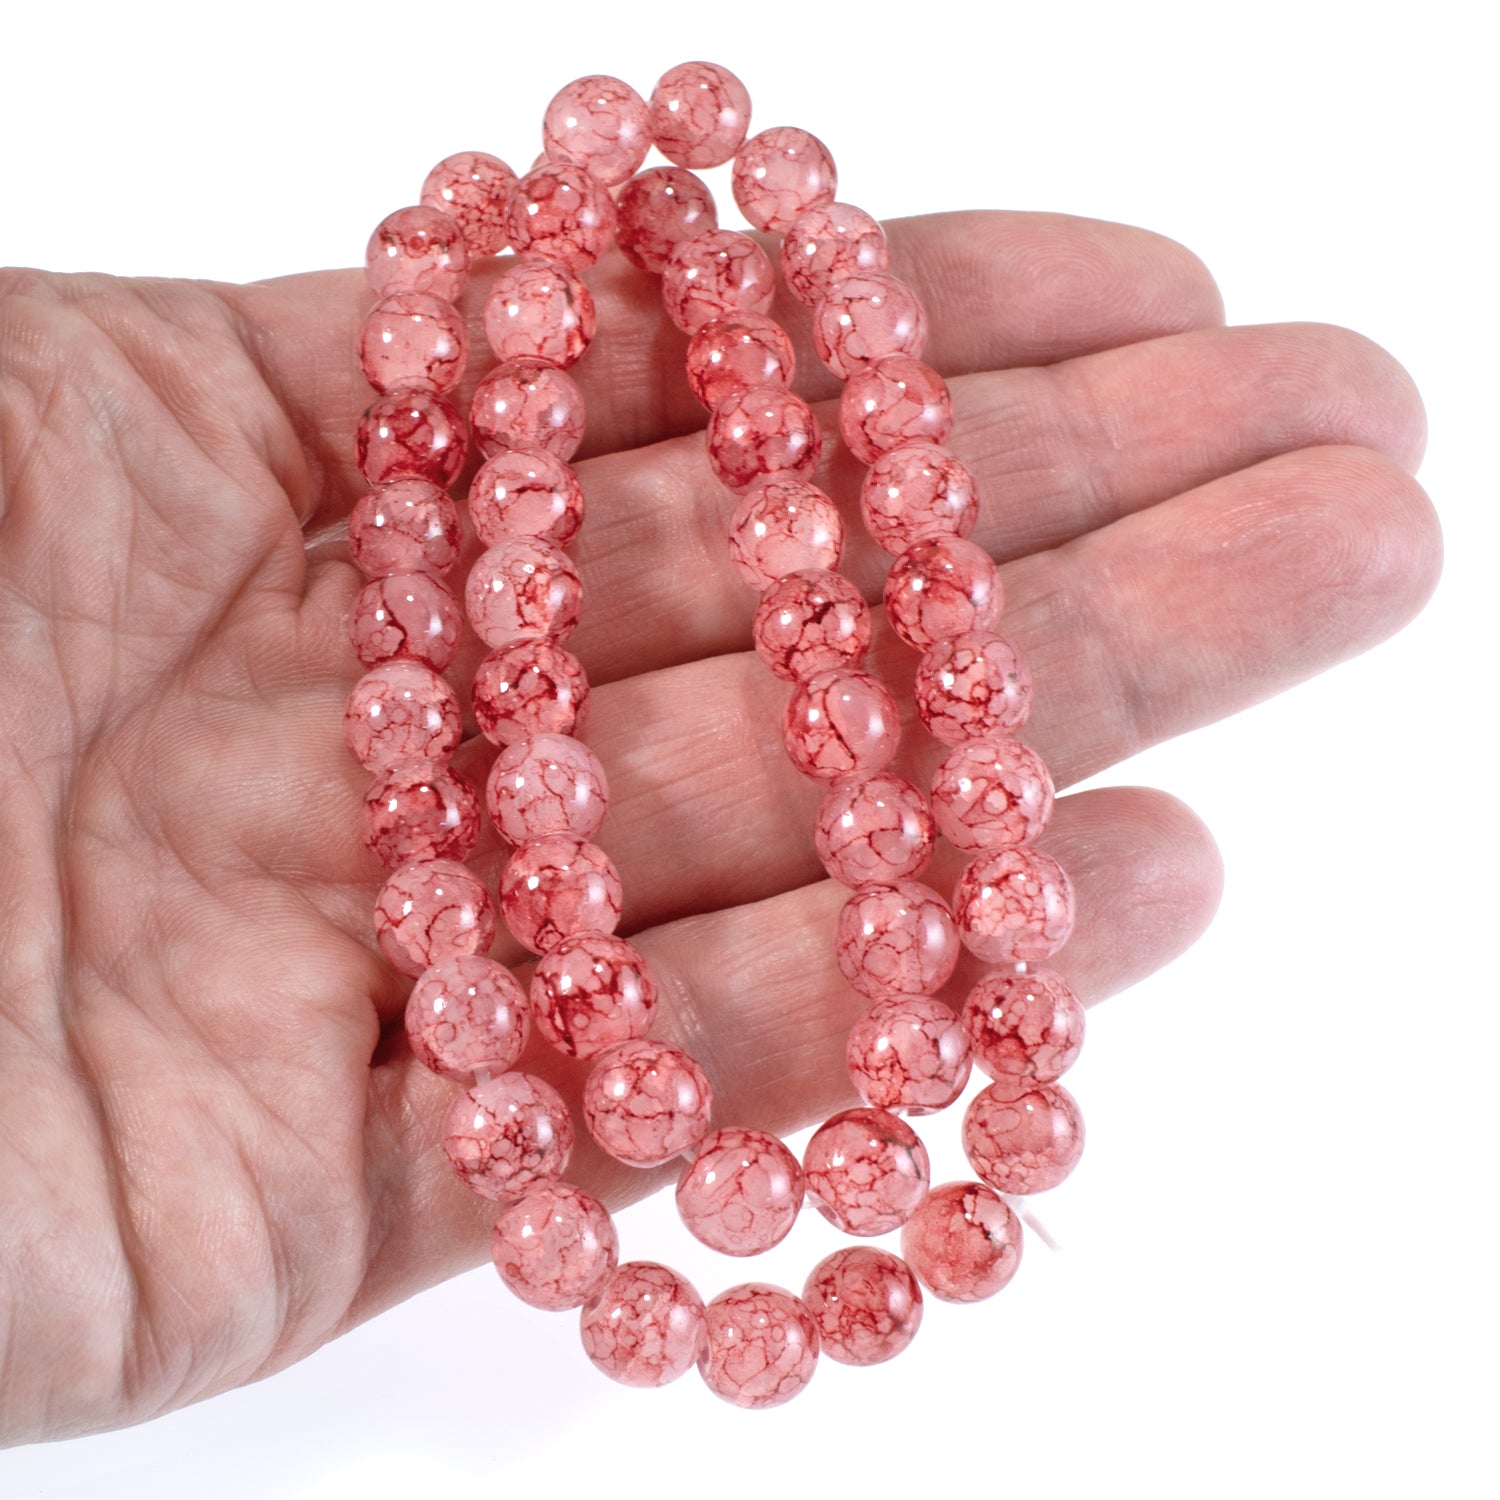 12 Vintage Glass Strawberry Beads, Dimpled beads, Berry Beads, Red #1472D